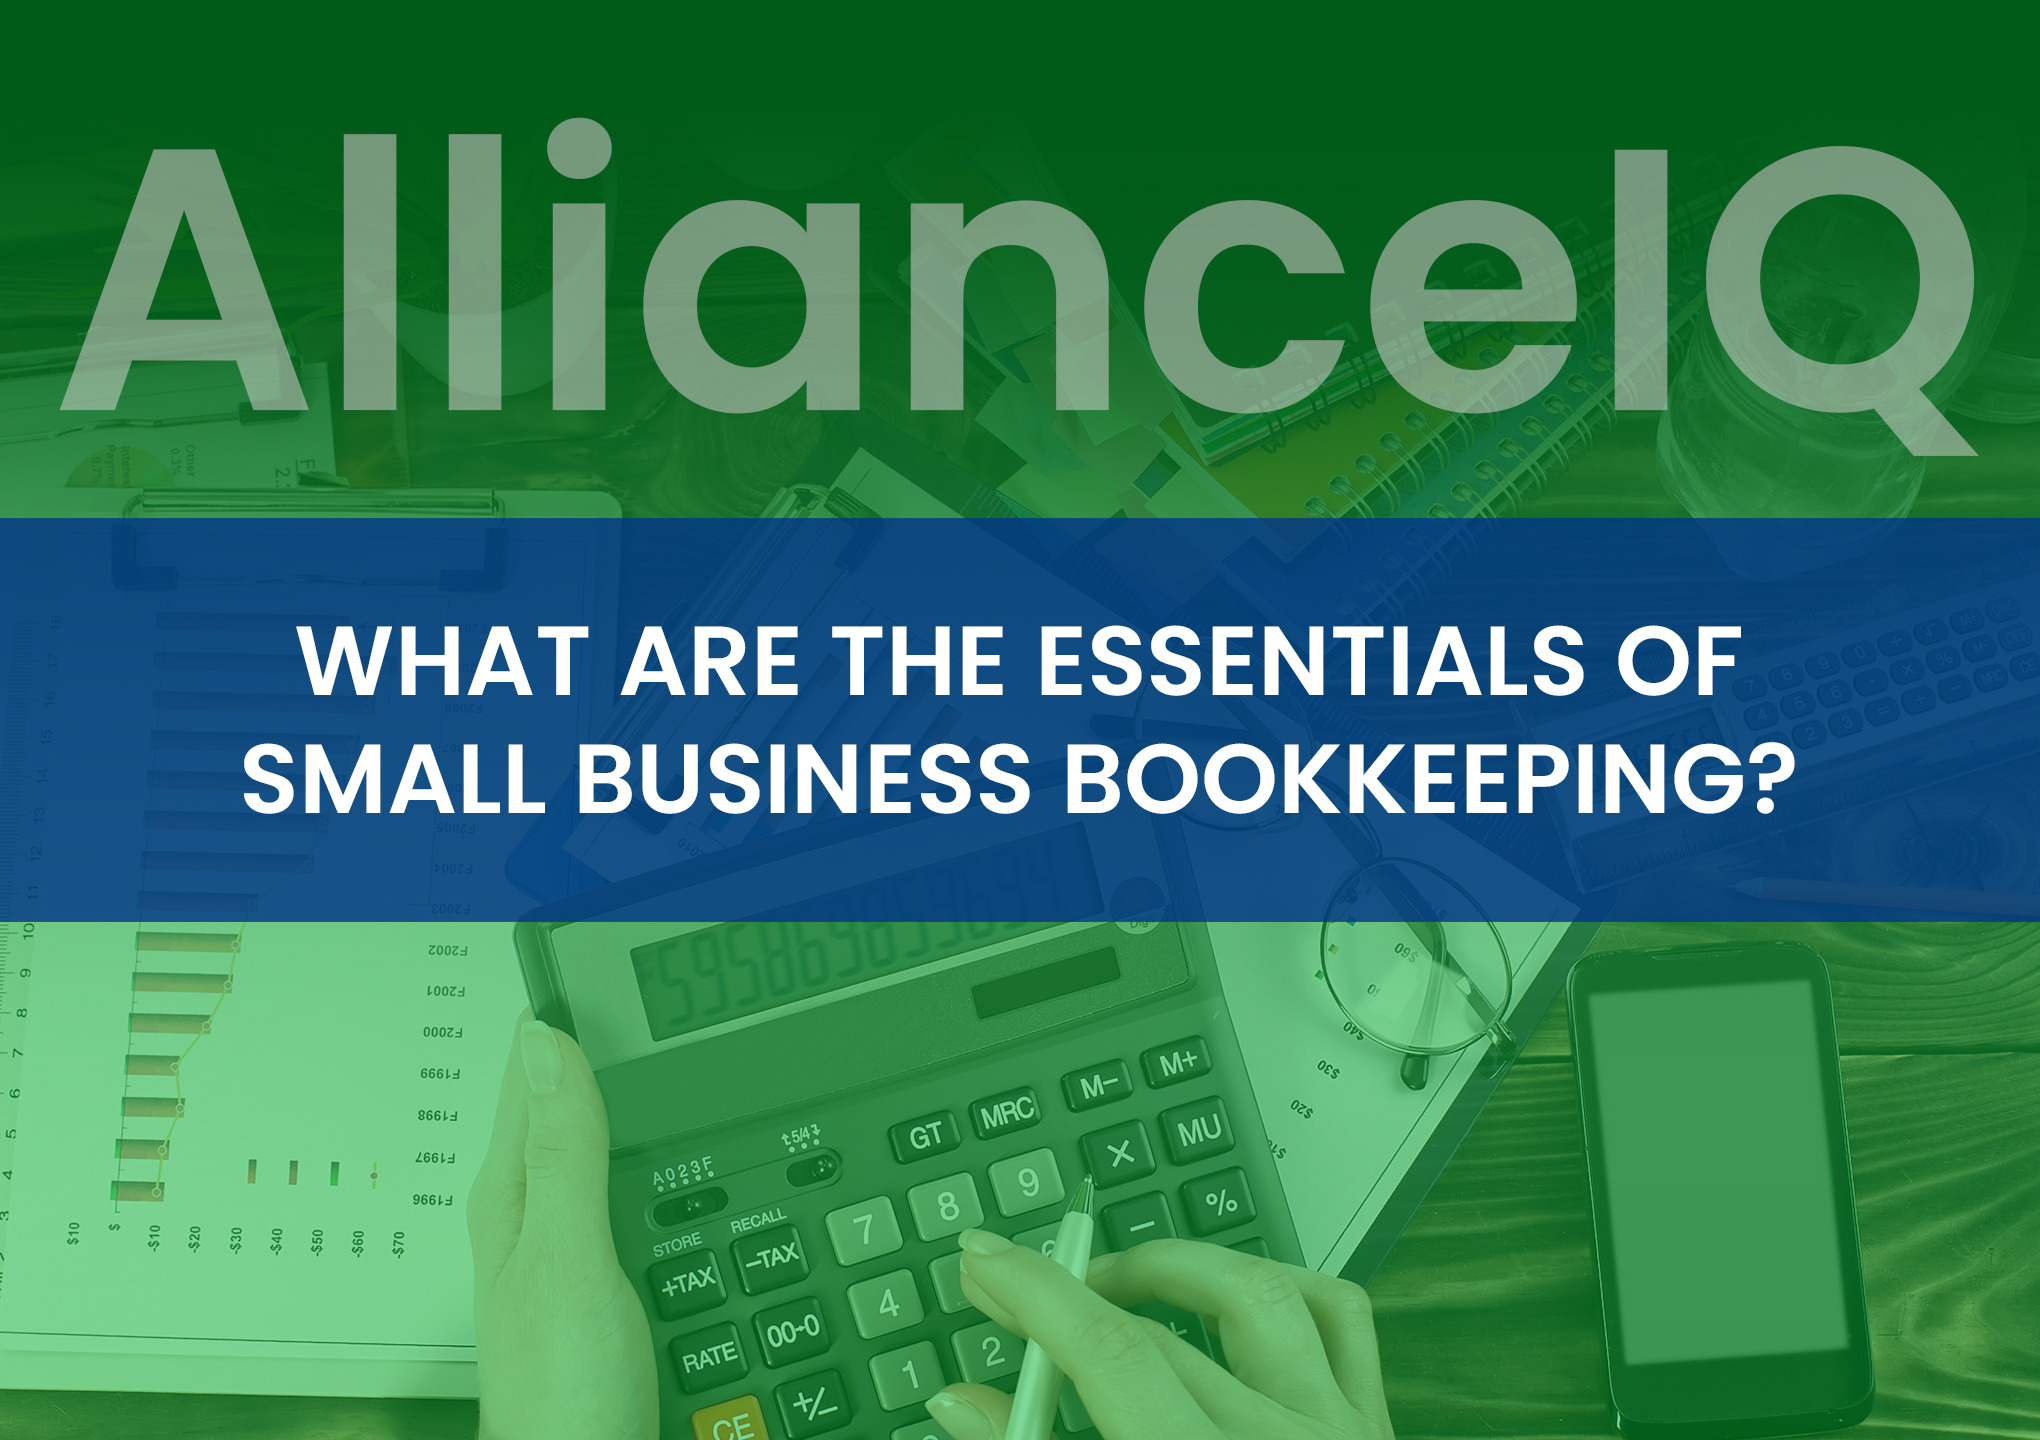 What are the essentials of Small Business Bookkeeping